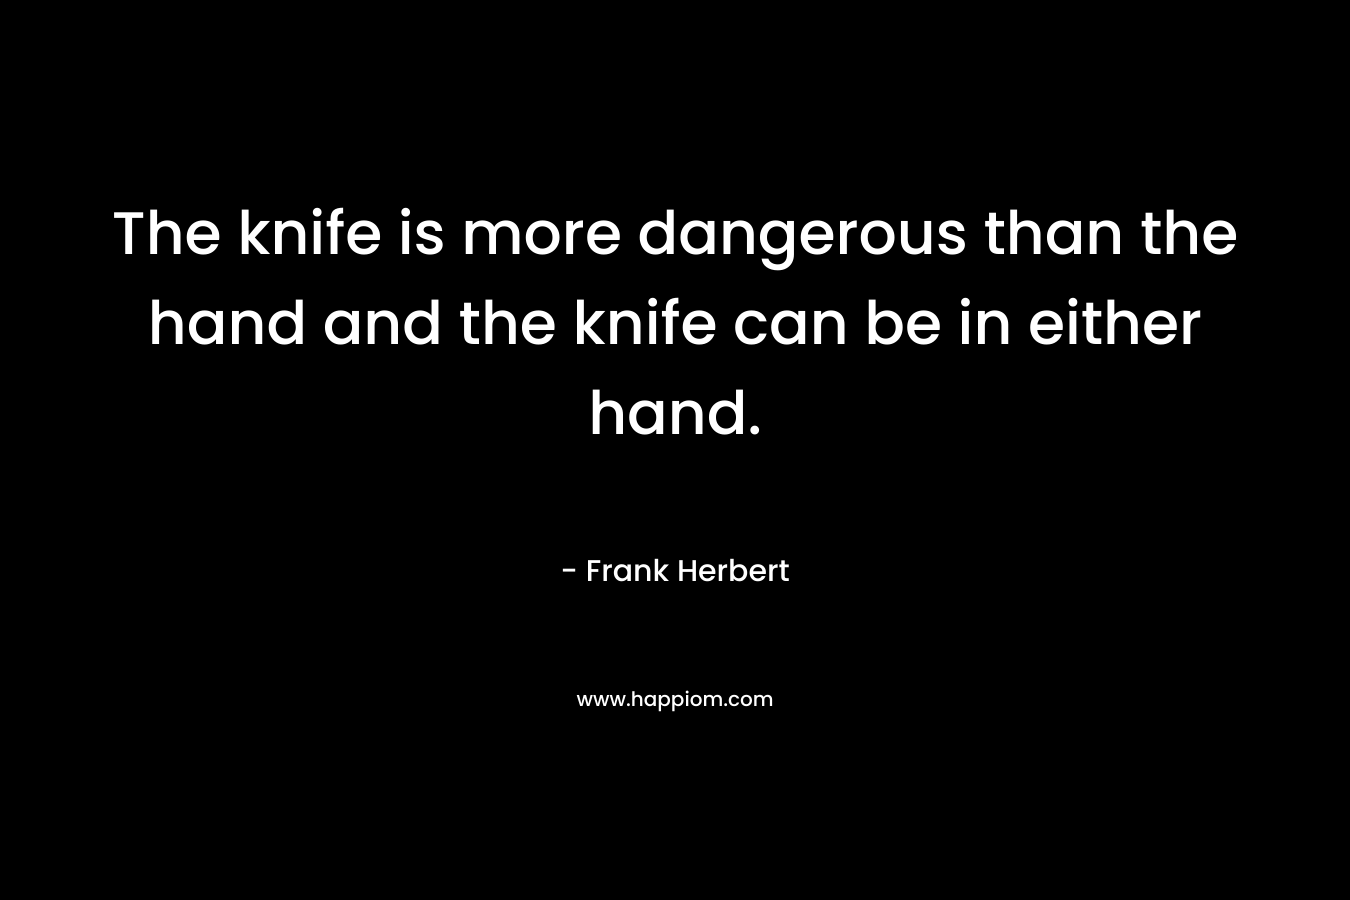 The knife is more dangerous than the hand and the knife can be in either hand.